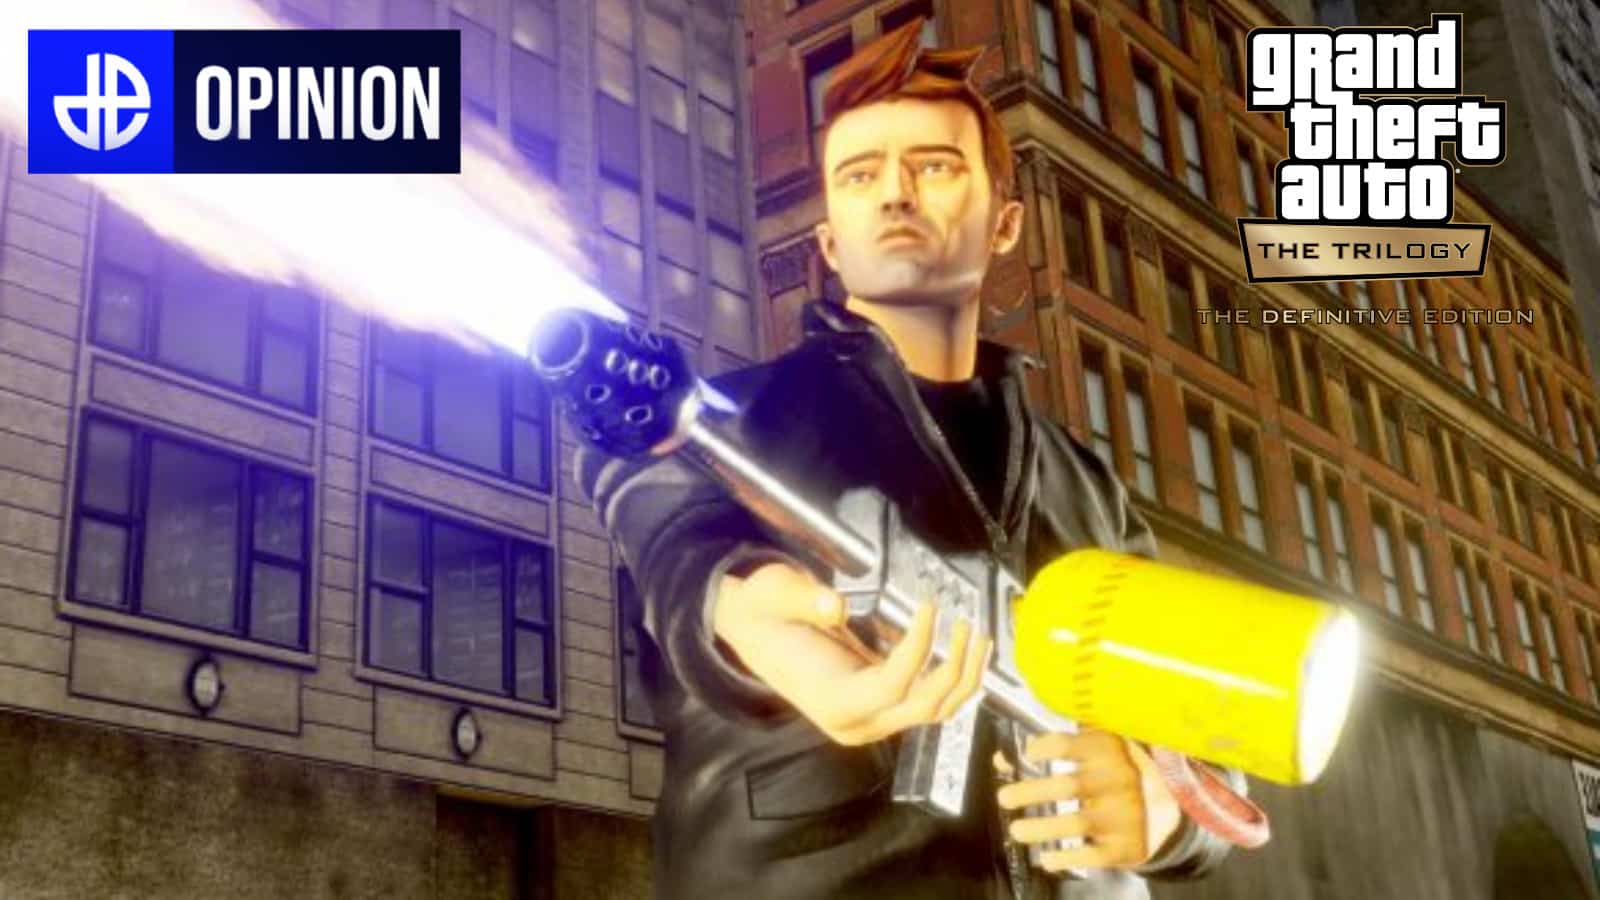 Grand Theft Auto 3: Definitive Edition - the good, the bad and the ugly